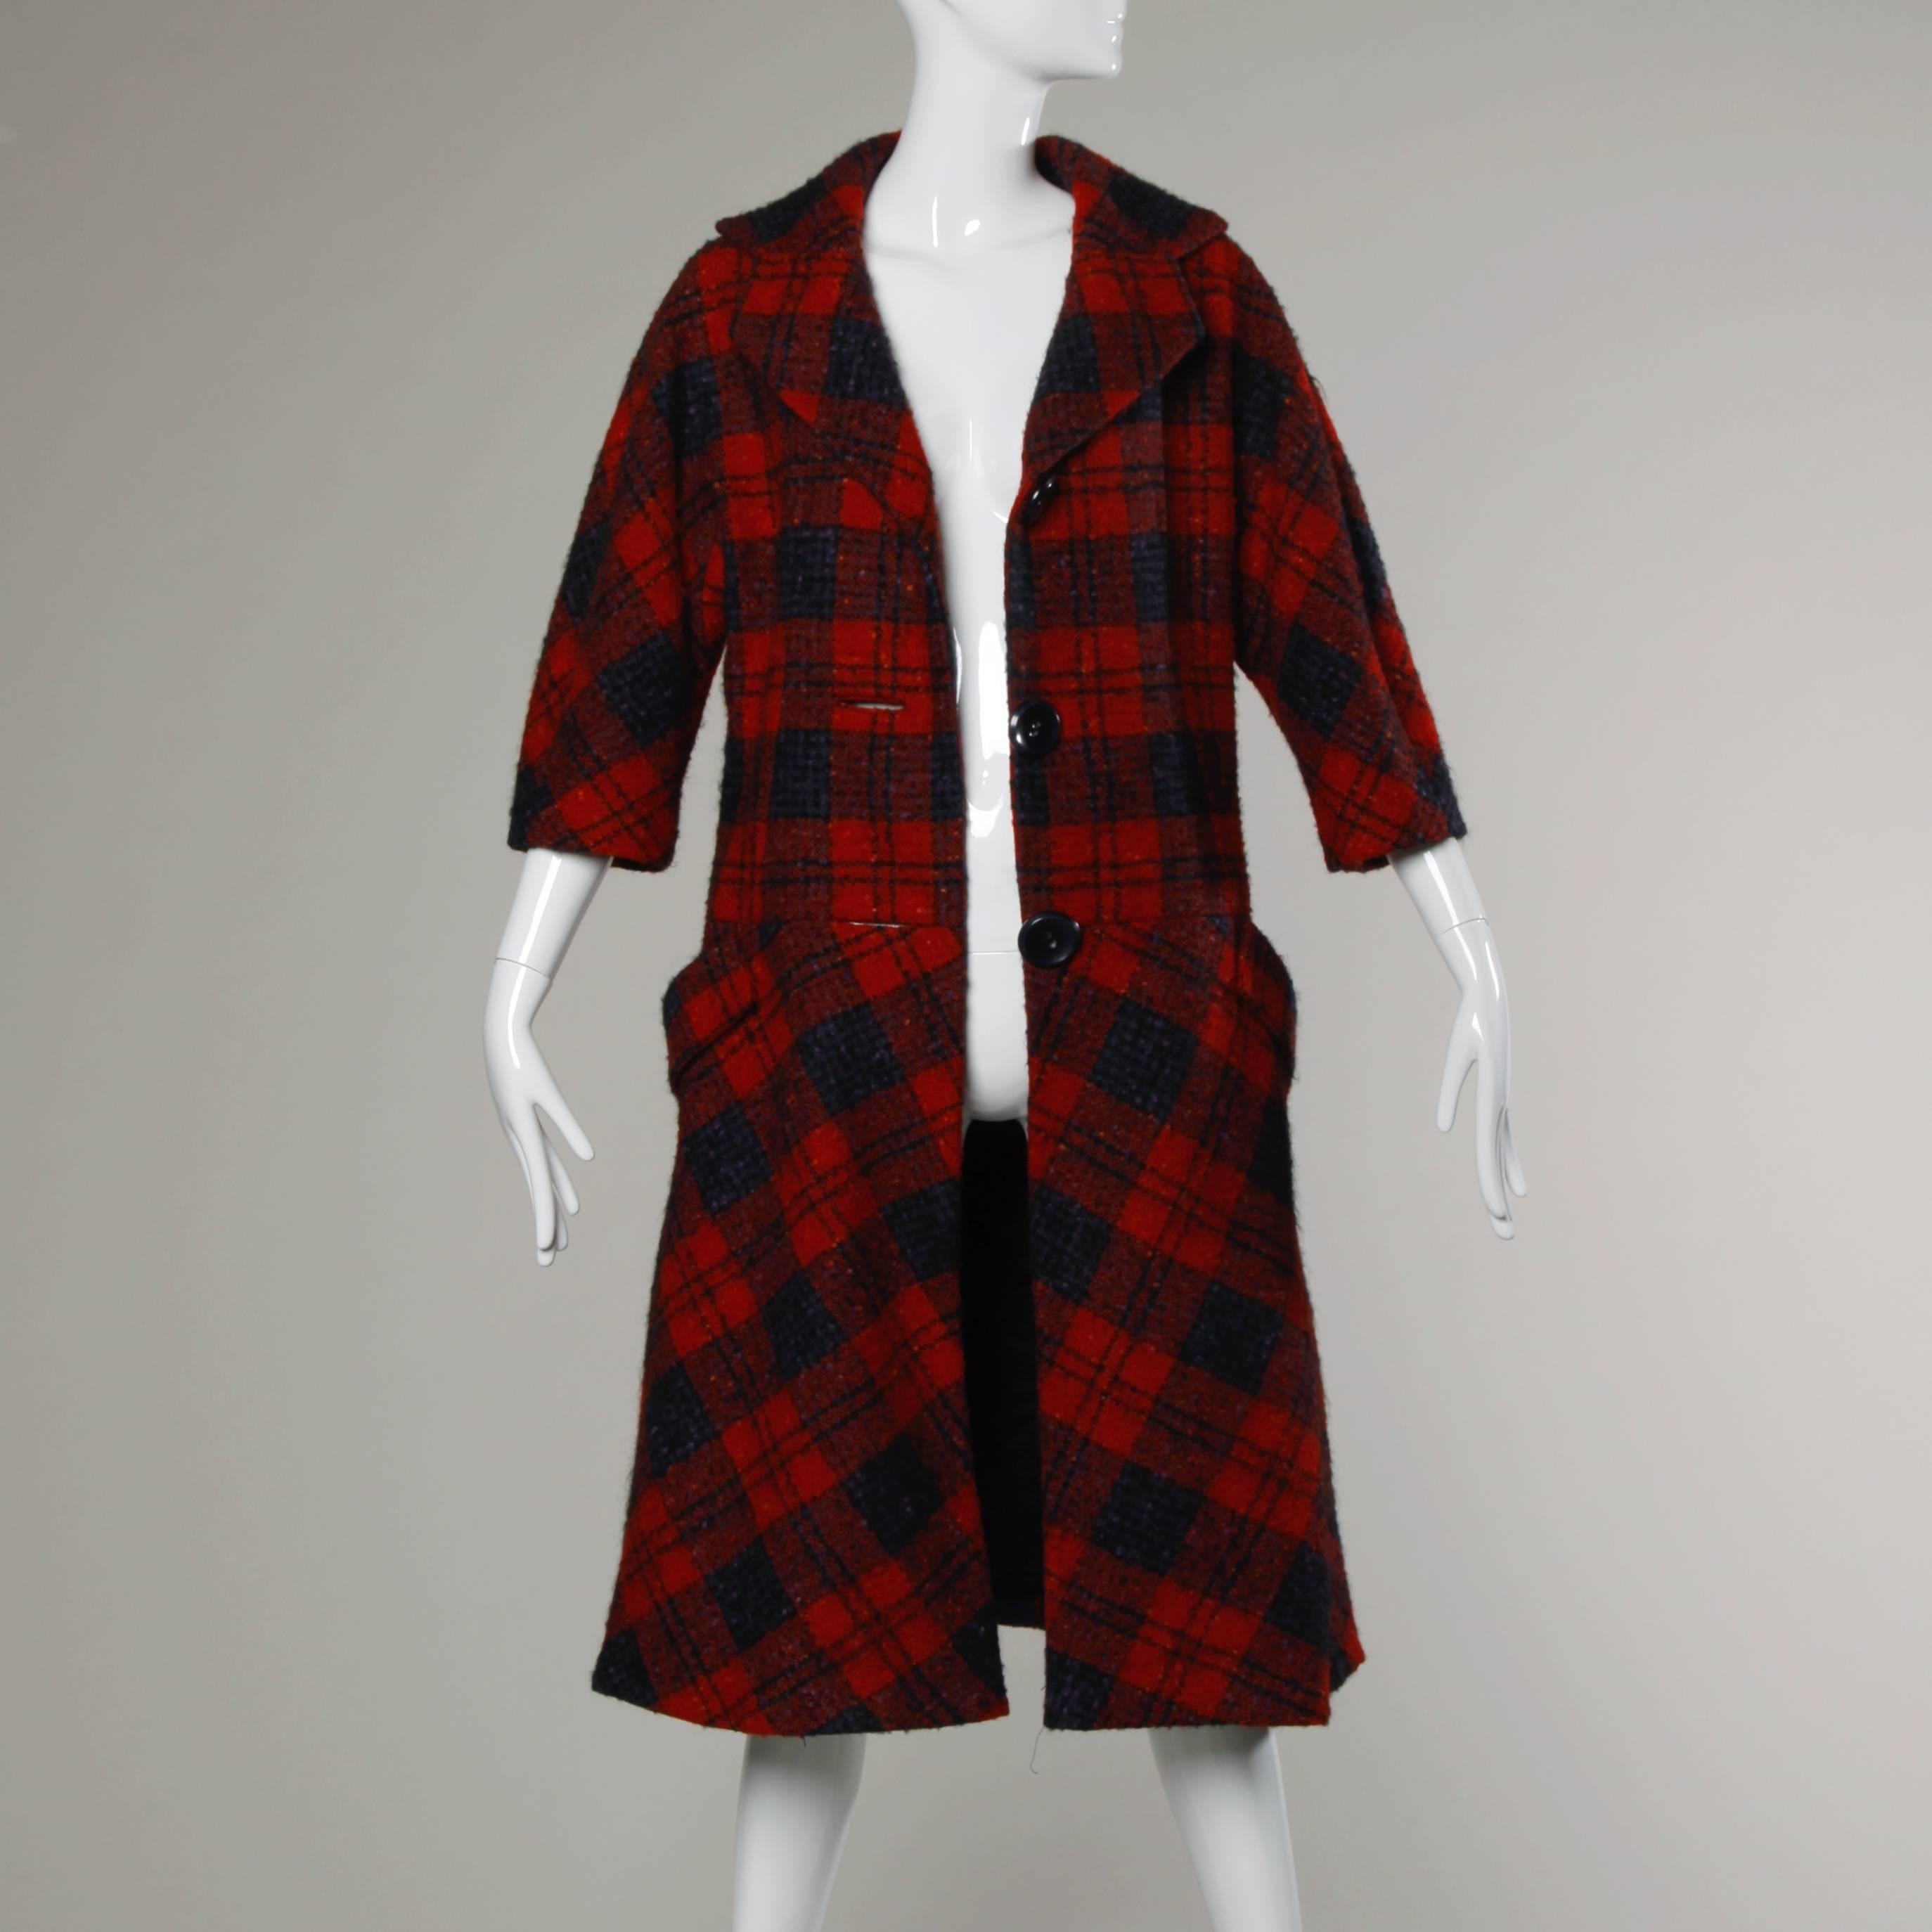 Sarmi 1960s Vintage Red Plaid Coat In Excellent Condition For Sale In Sparks, NV